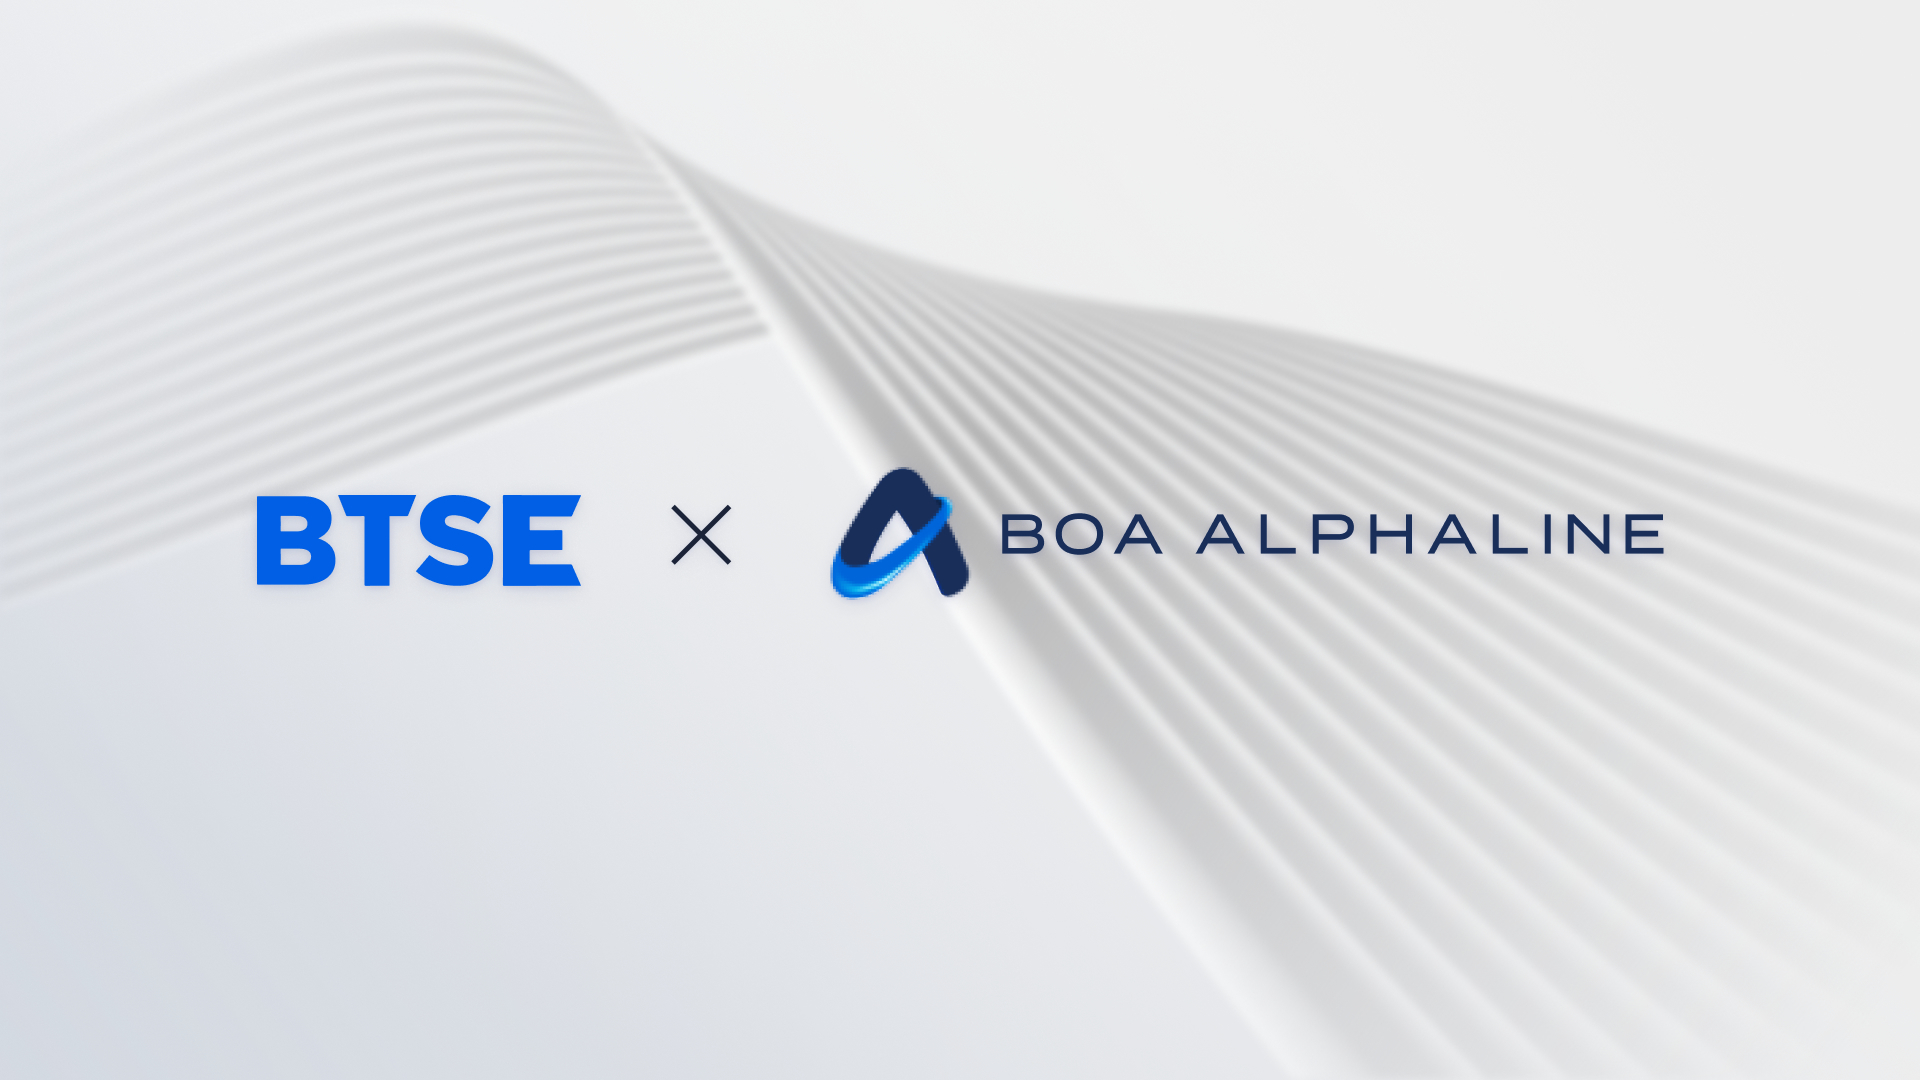 BTSE and BOA Alphaline Announce Strategic Partnership to Broaden Digital Asset Investment Opportunities for Institutional and High-Net-Worth Investors